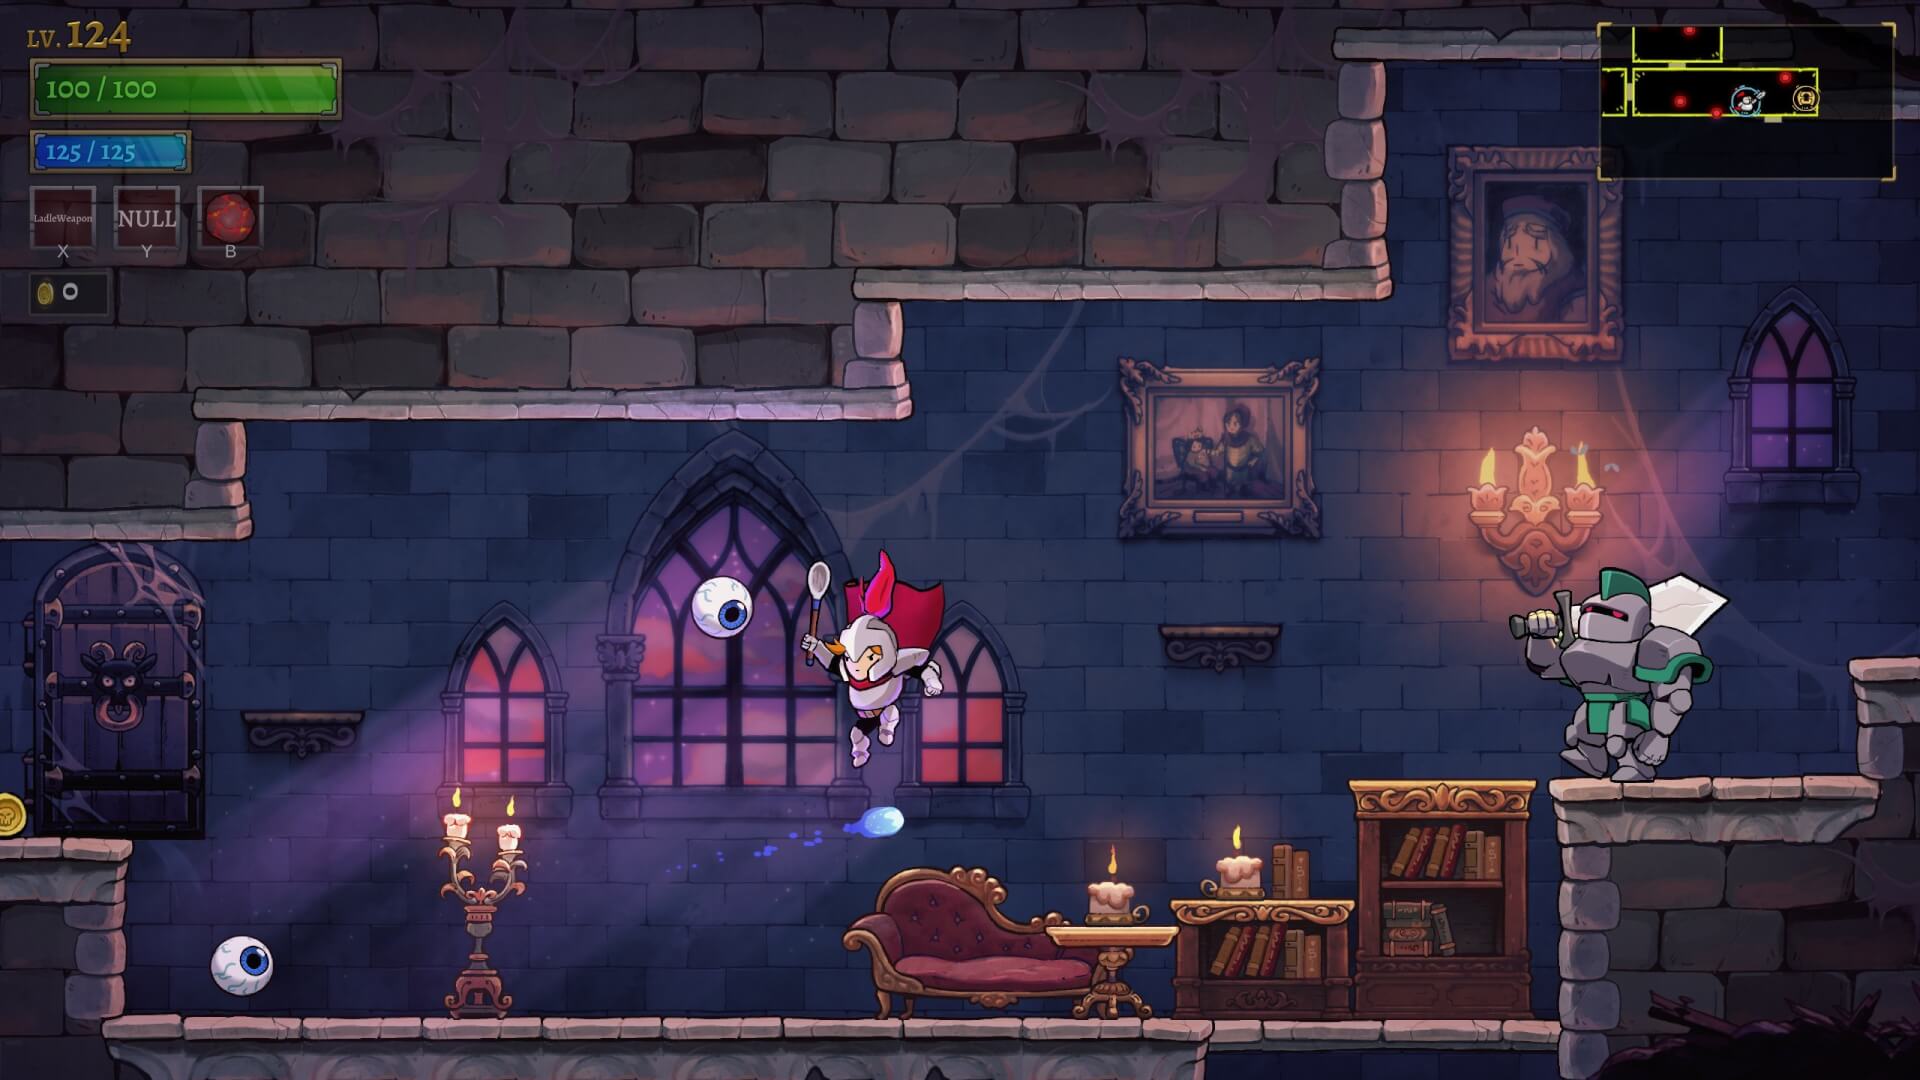 instal the new for android Rogue Legacy 2